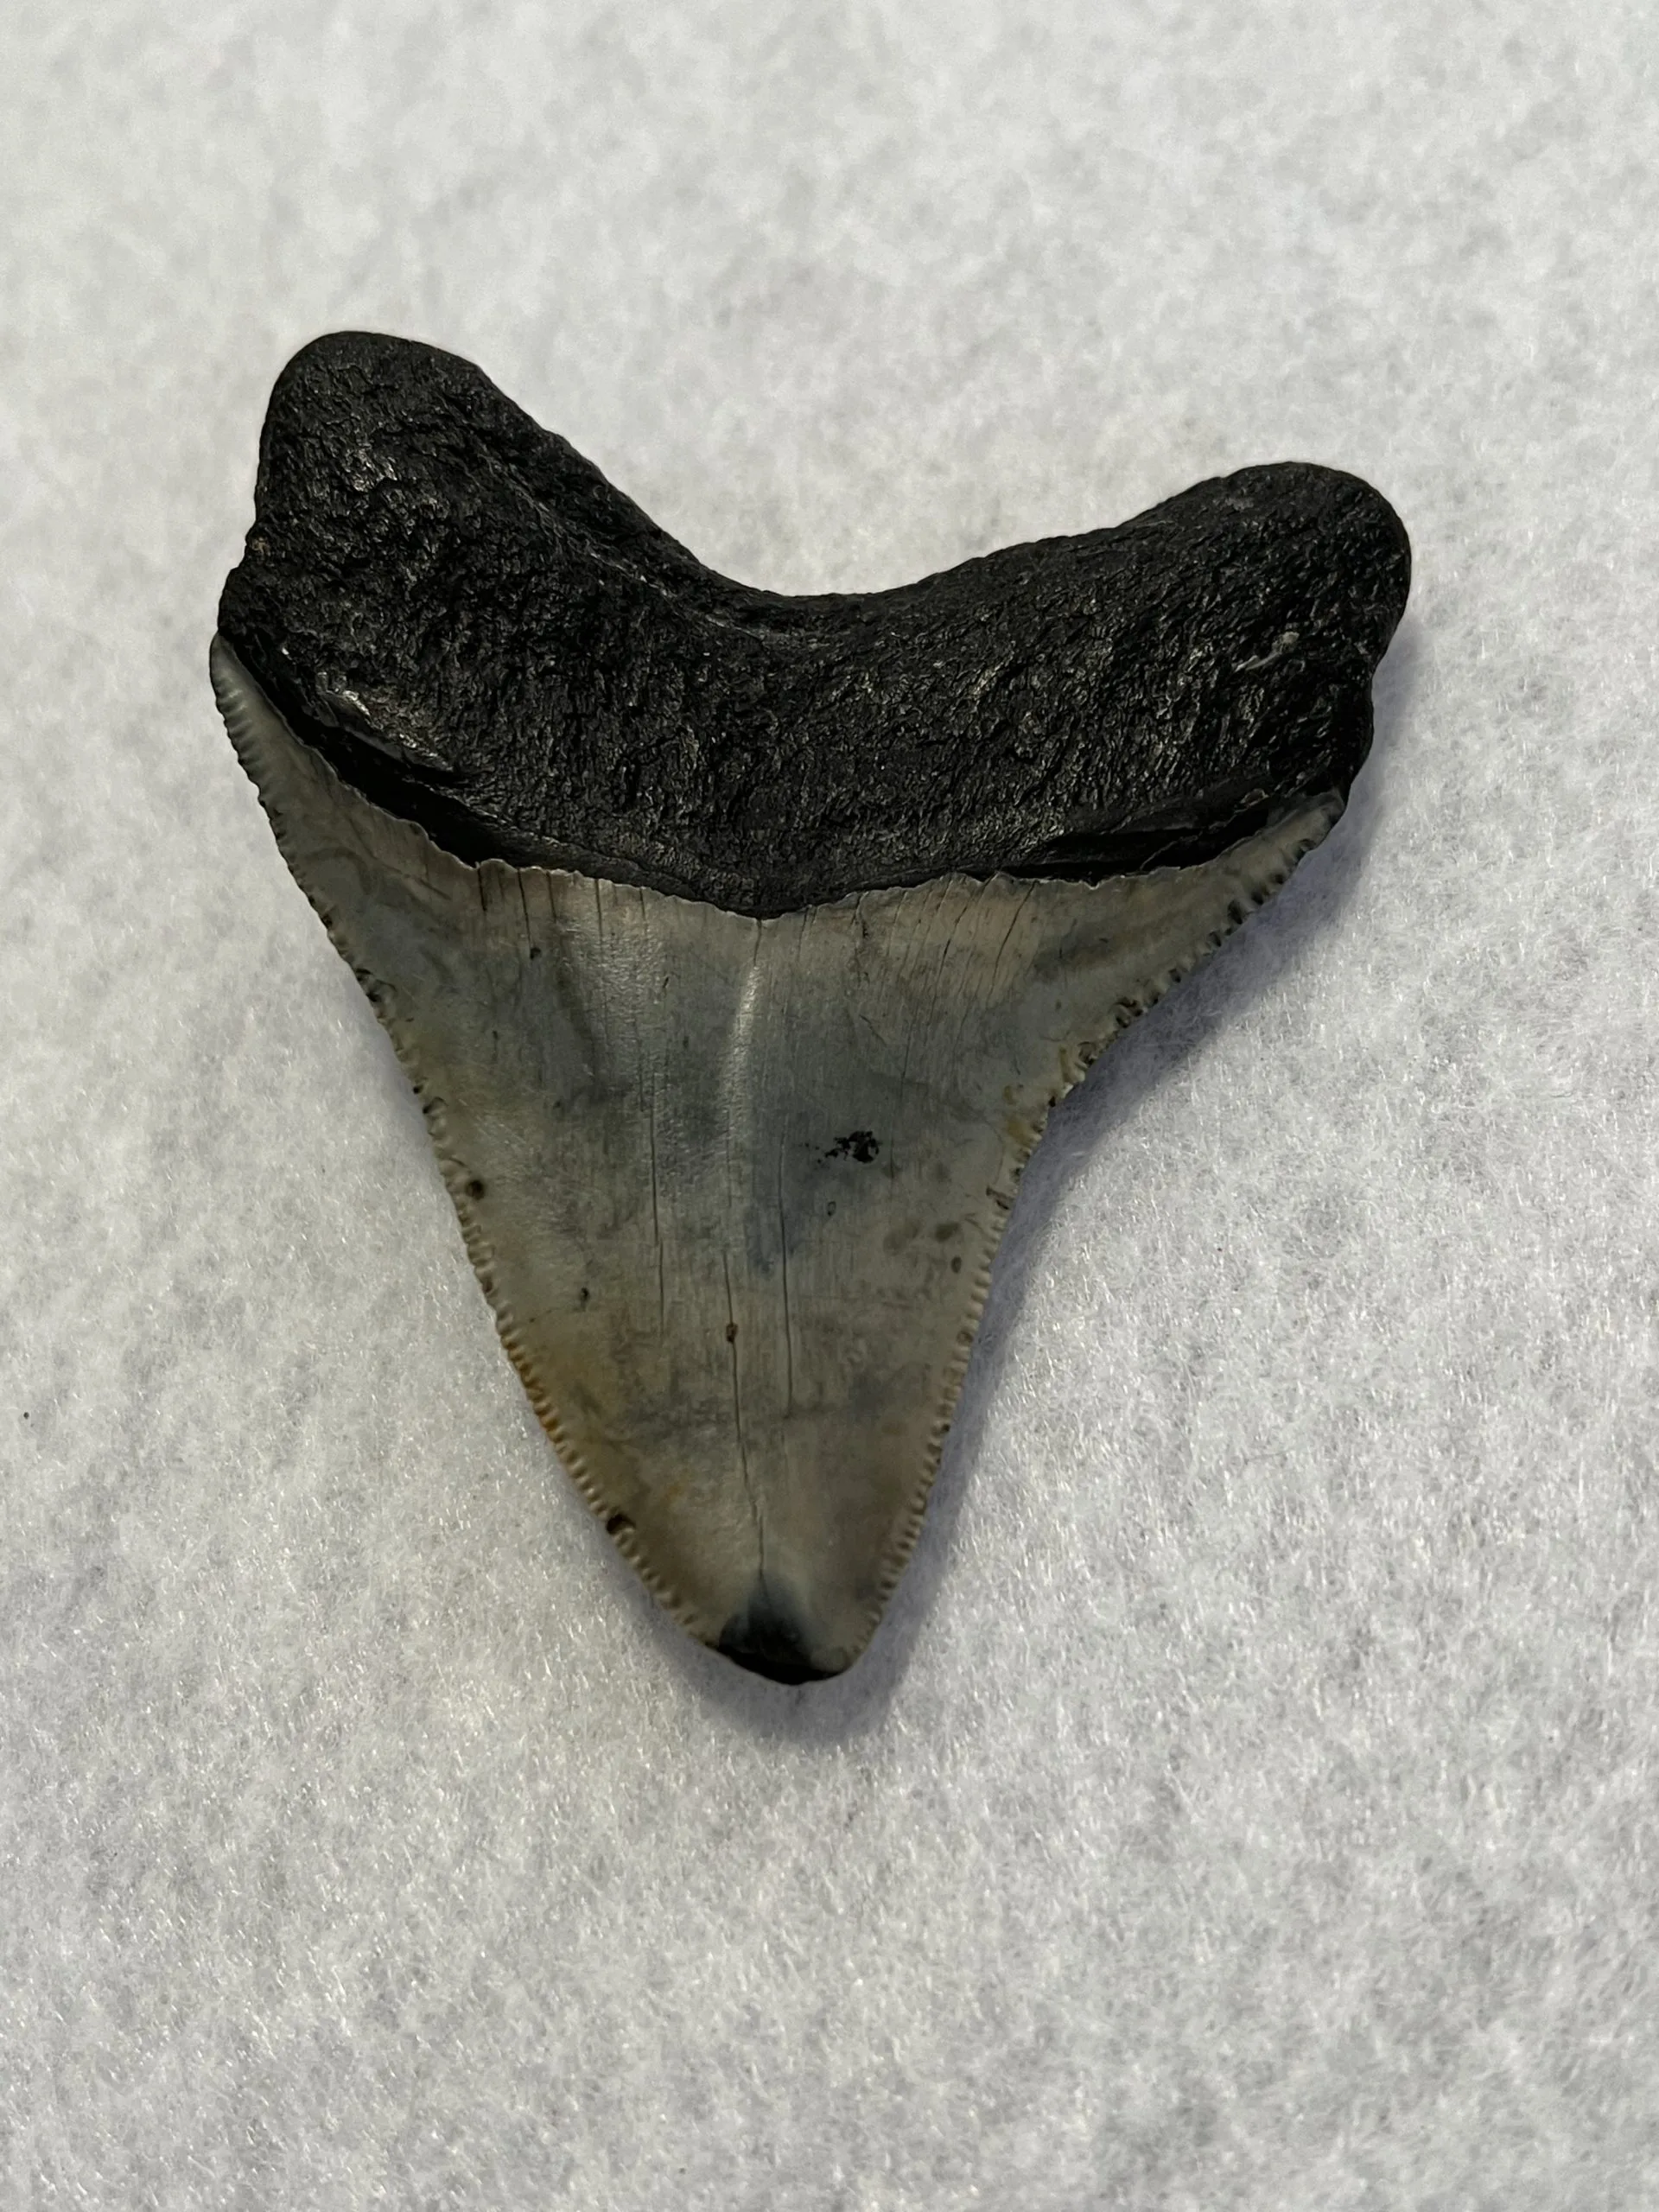 Megalodon Tooth South Carolina 3.55 inch Prehistoric Online